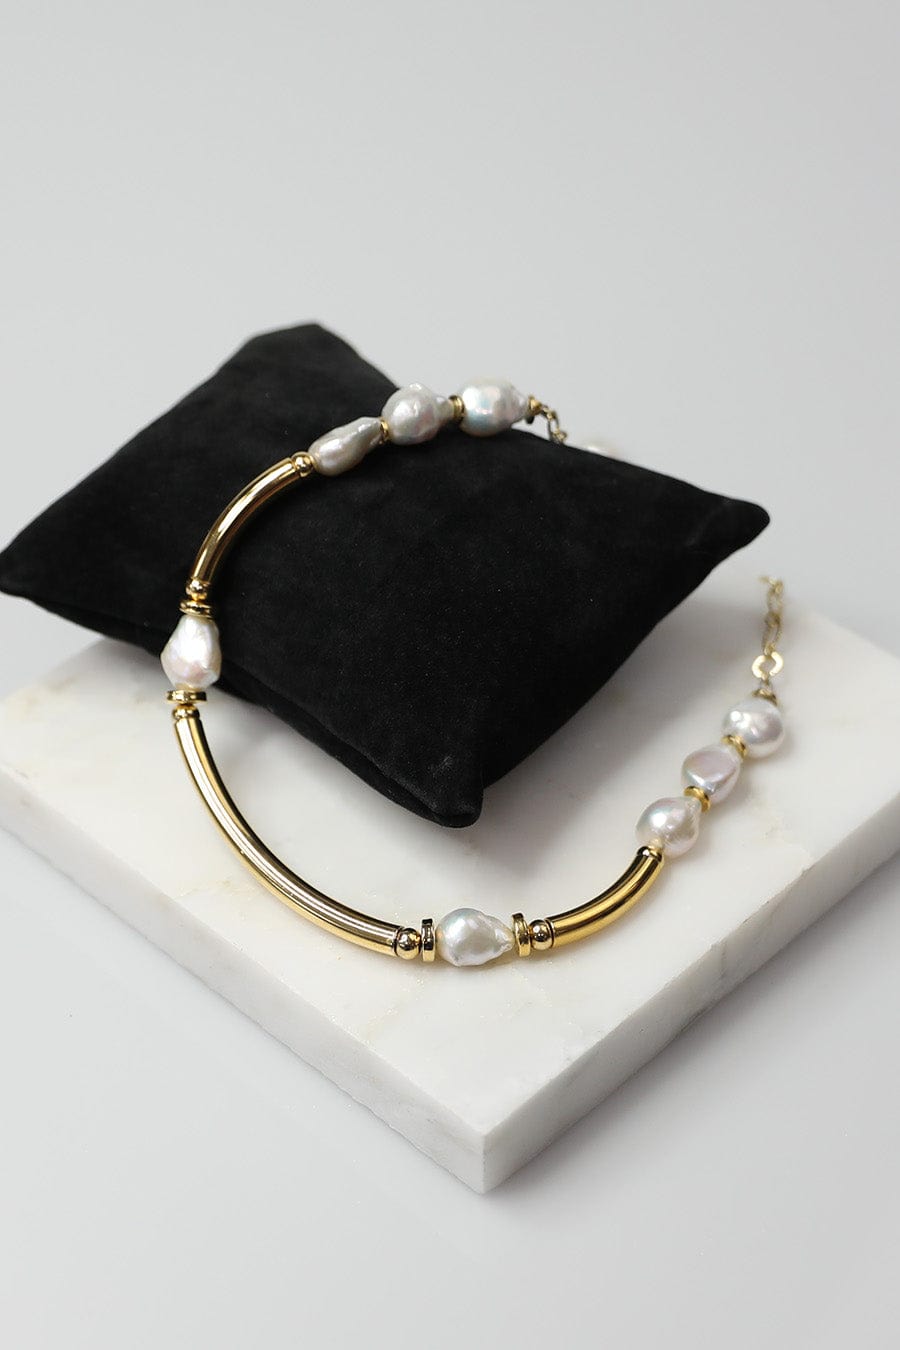 Handmade Gold Tube Bead and Freshwater Pearl Necklace